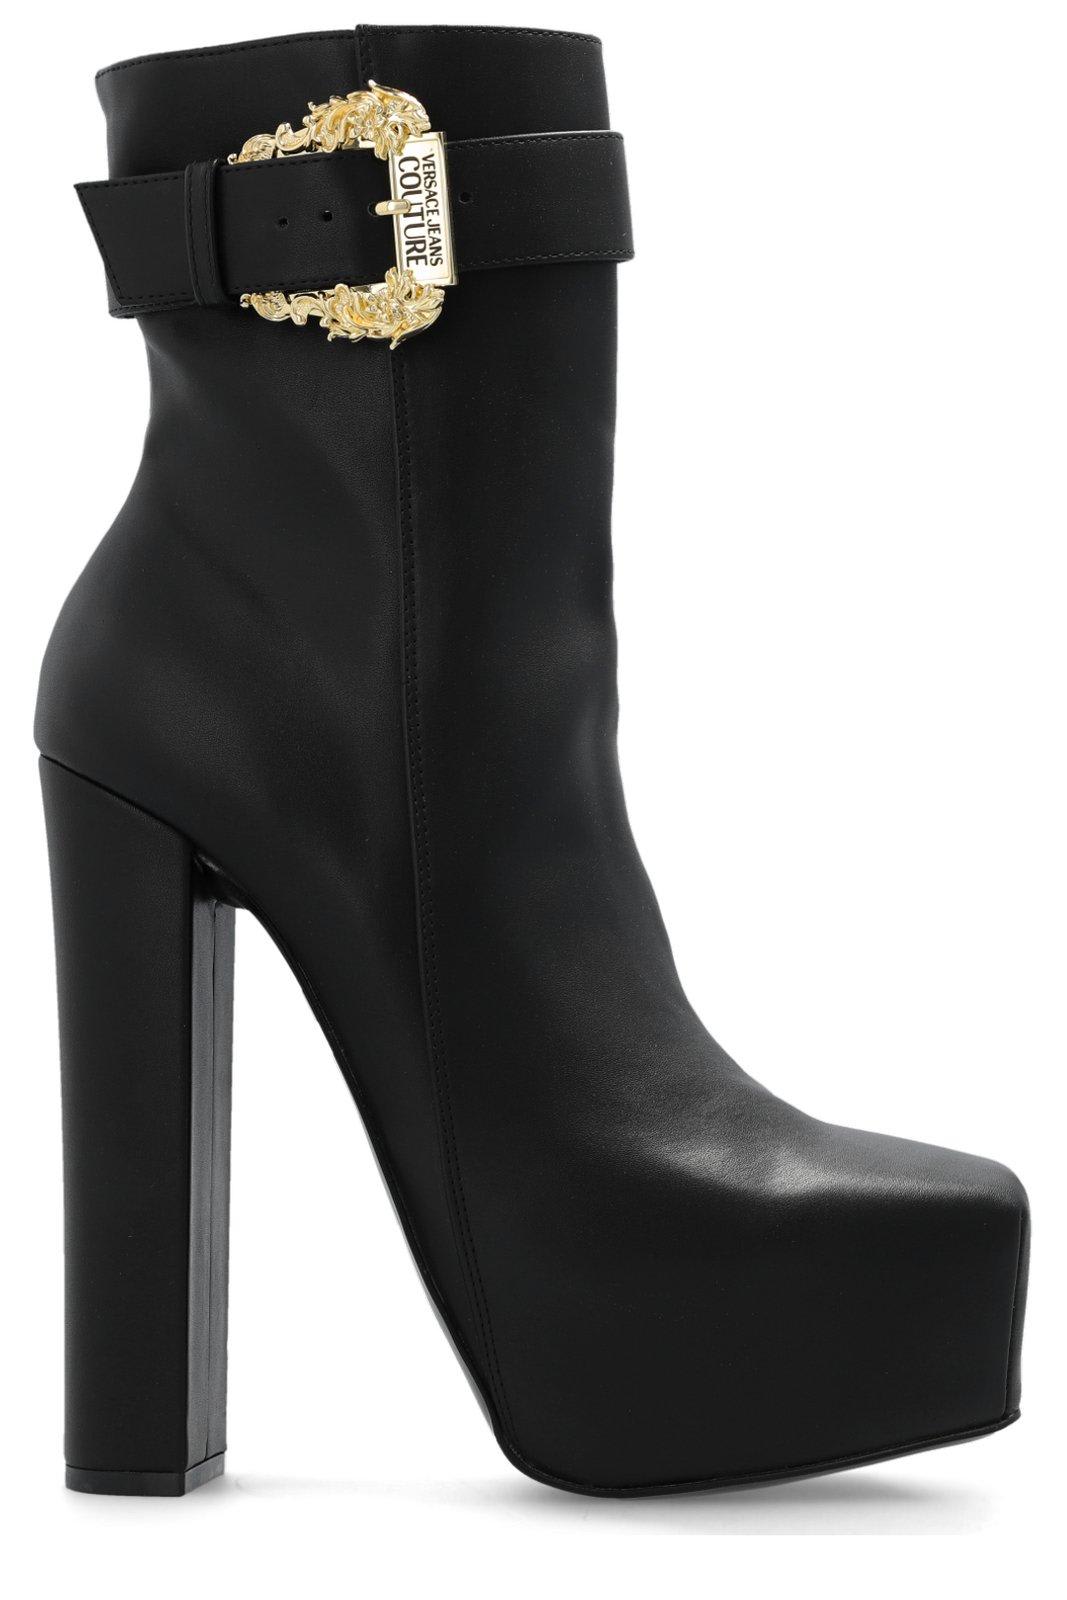 VERSACE JEANS COUTURE BAROCCO-BUCKLED SQUARE TOE HEELED BOOTS